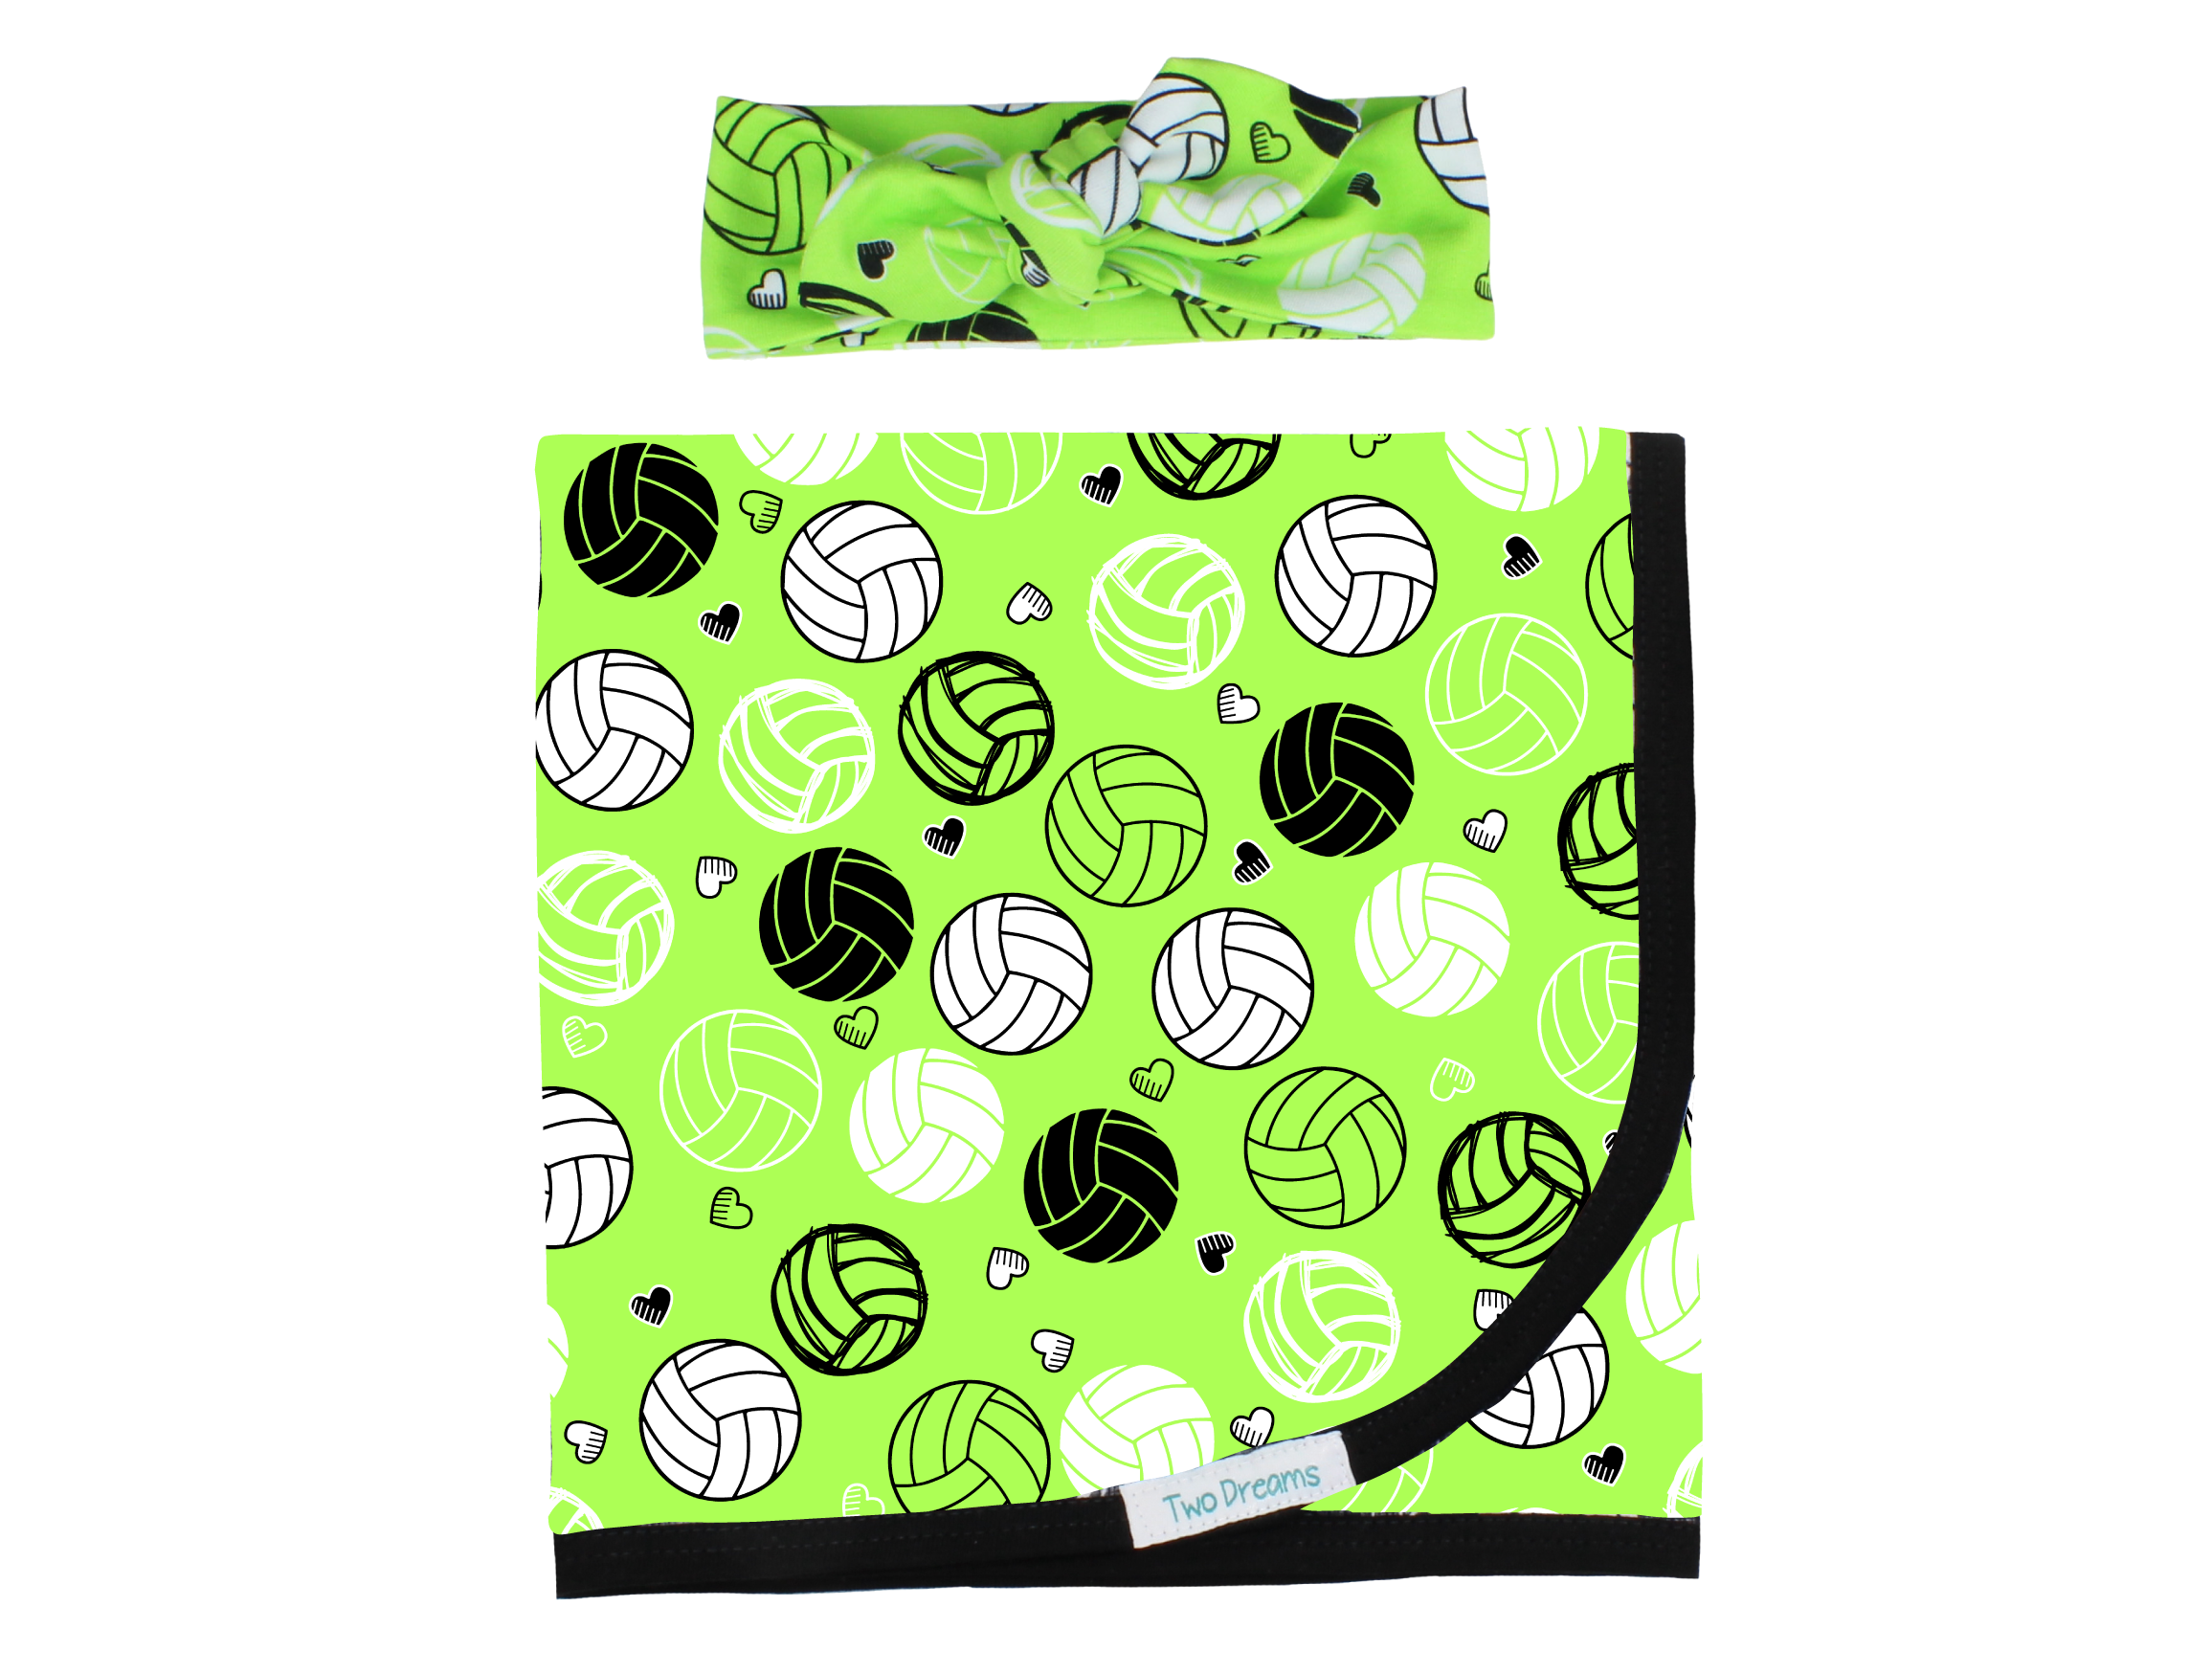 Neon Green Volleyball Baby Girl Outfit